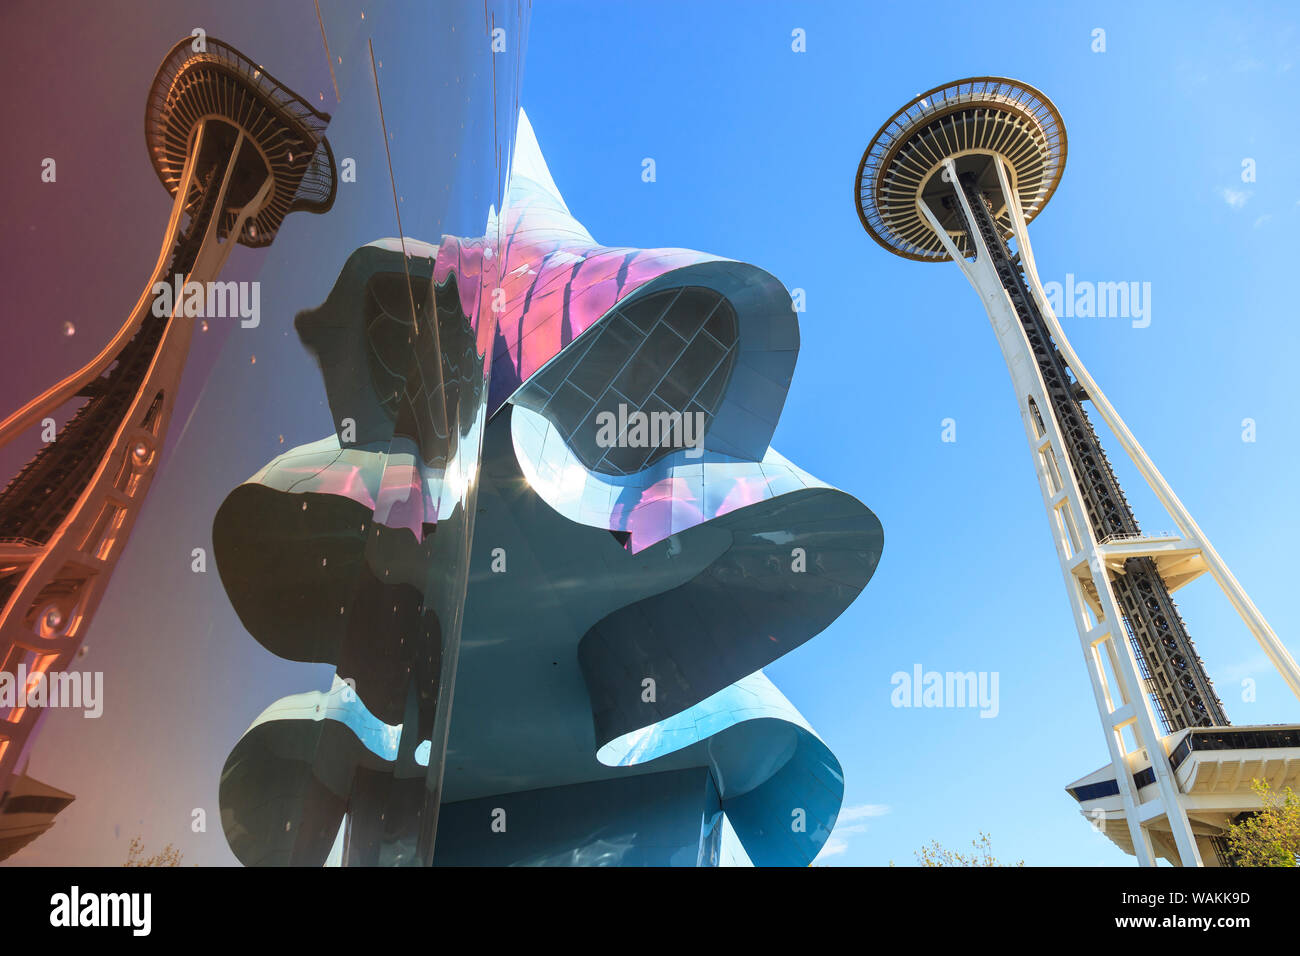 Space Needle and Museum Of Pop Culture (formerly called EMP Experience Music Project), Seattle Center, Seattle, Washington State, USA Stock Photo